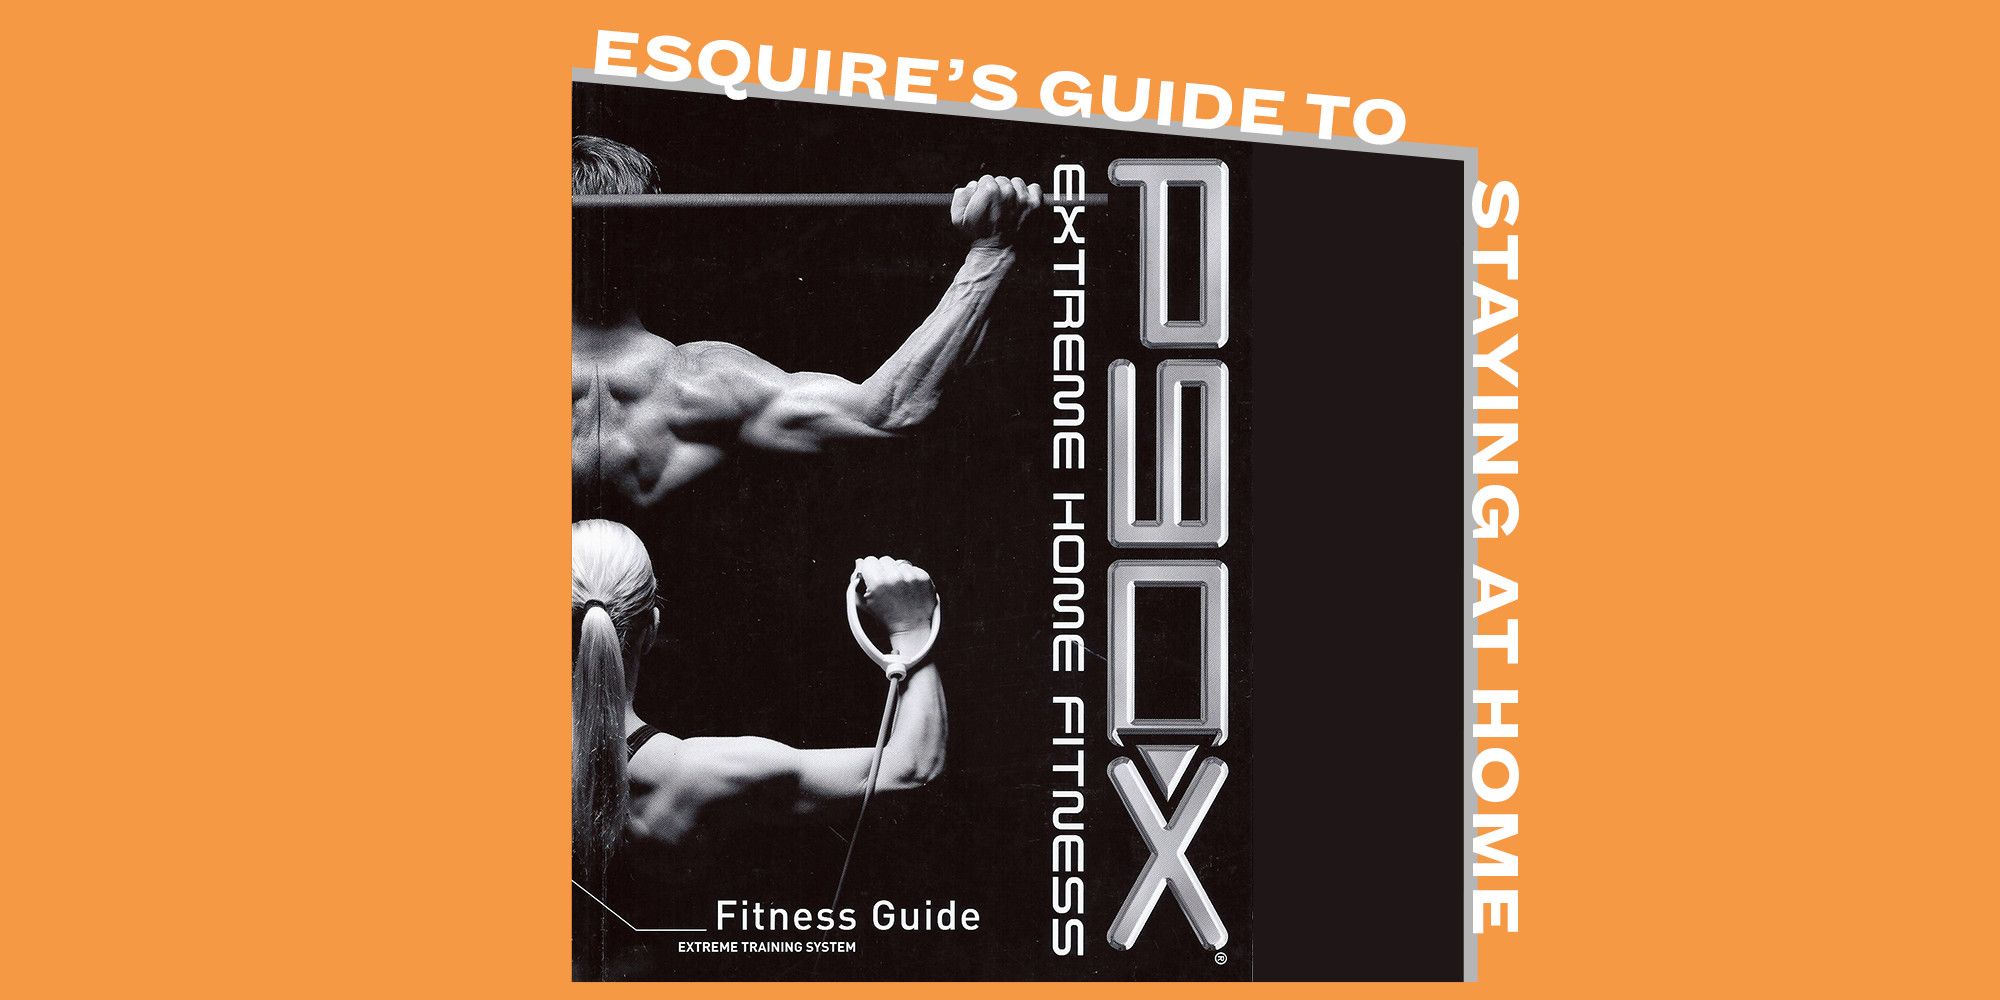 p90x workout schedule for women